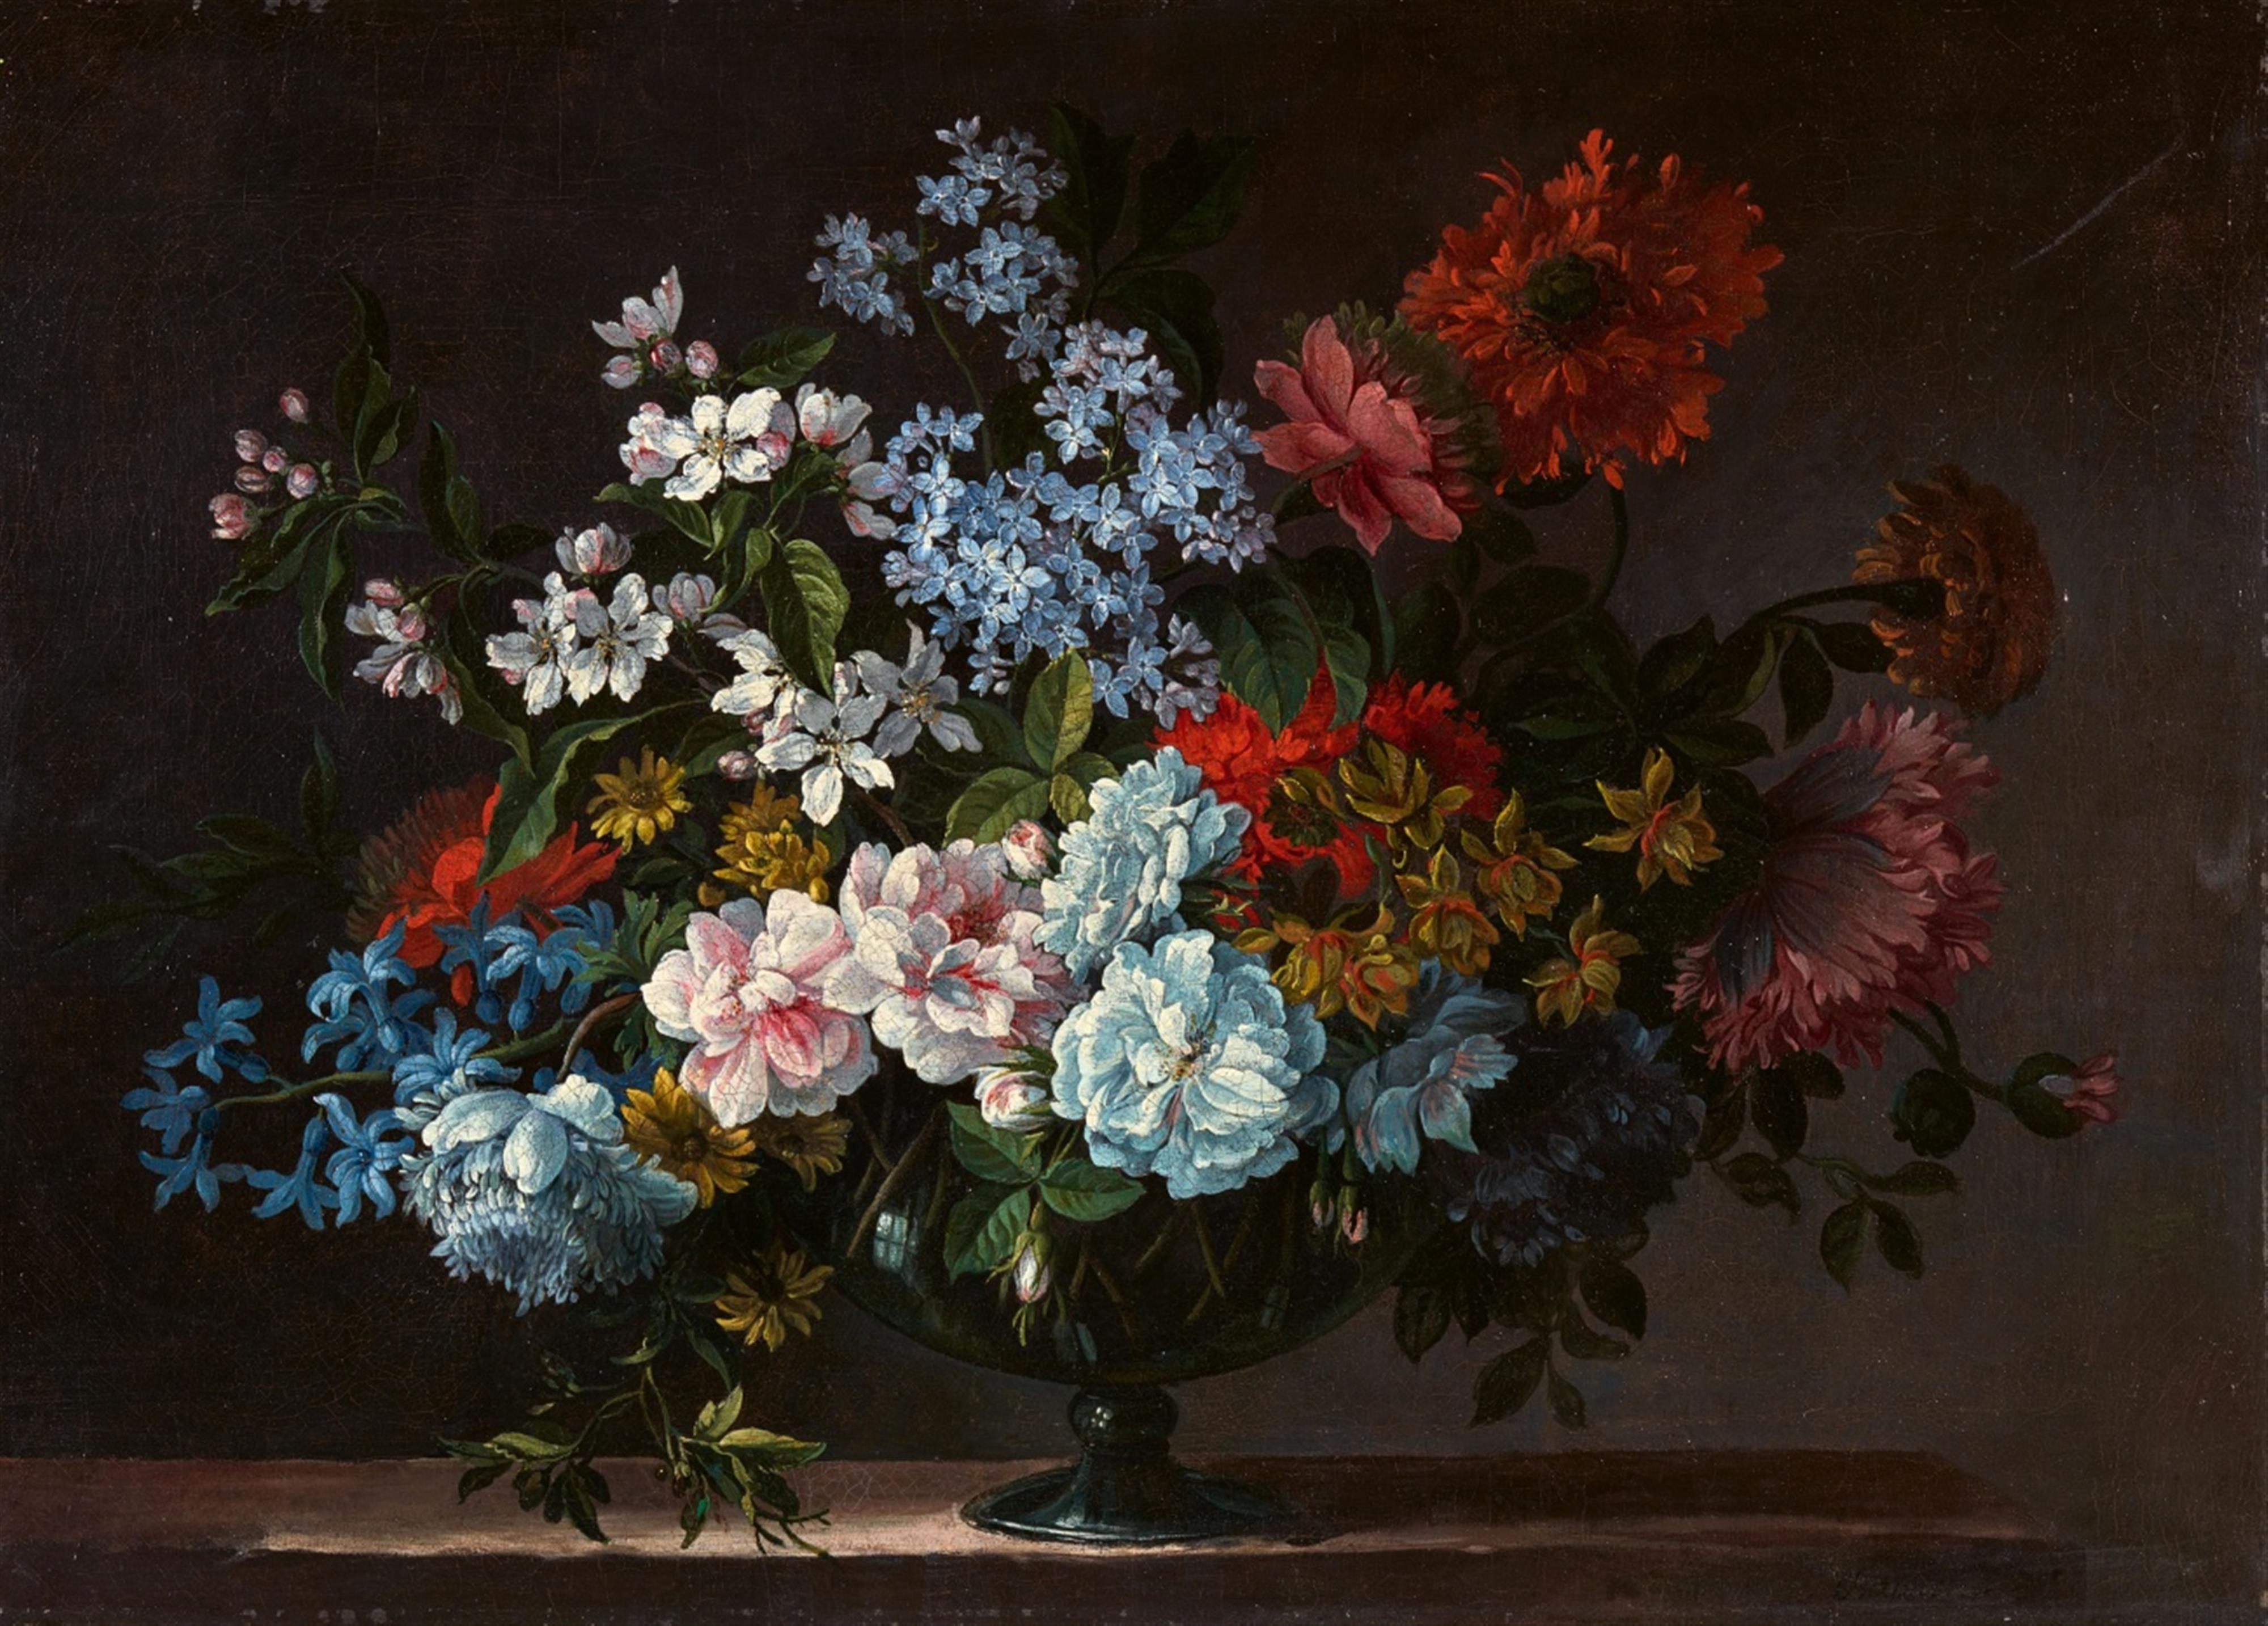 Jean-Baptiste Monnoyer - Still Life with Hyacinths, Peonies, Narcissi, and Chrysanthemums in a Glass Vase - image-1